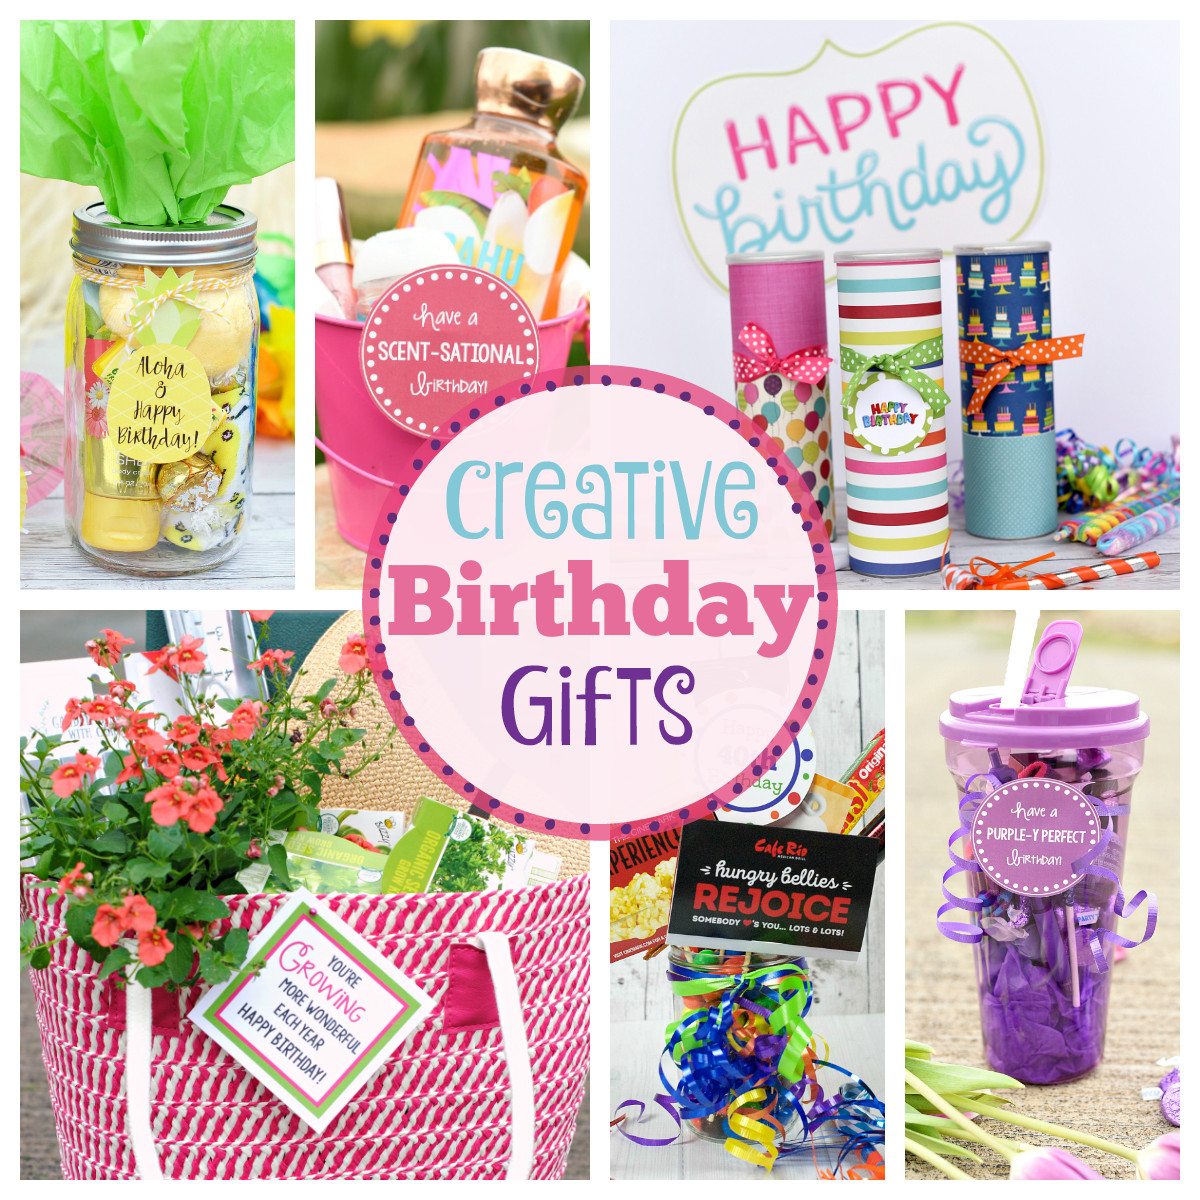 Birthday Gift For Best Friend
 25 Fun Birthday Gifts Ideas for Friends Crazy Little